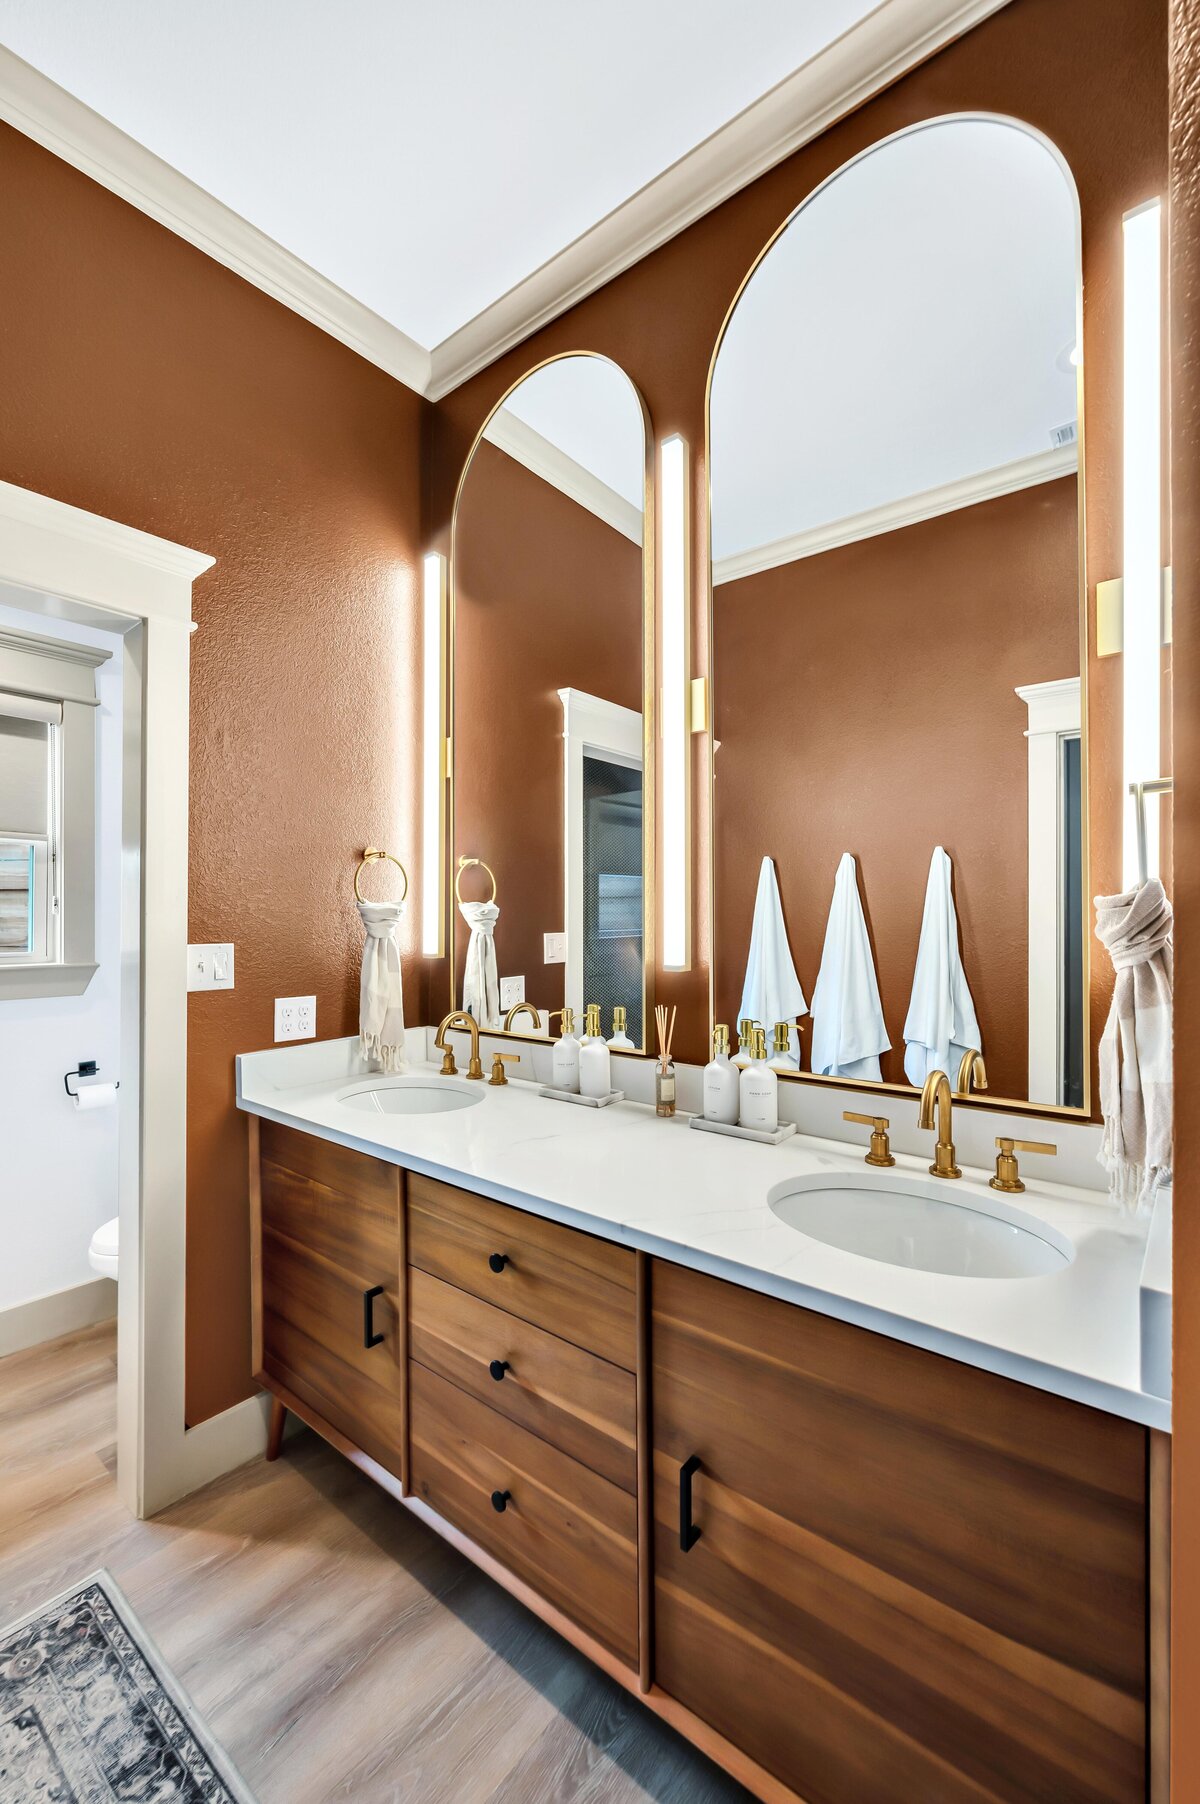 Luxurious double vanity in the bathroom of this three-bedroom, three-bathroom vacation rental home with free wifi, outdoor theater, hot tub, propane grill and private yard in Waco, TX.